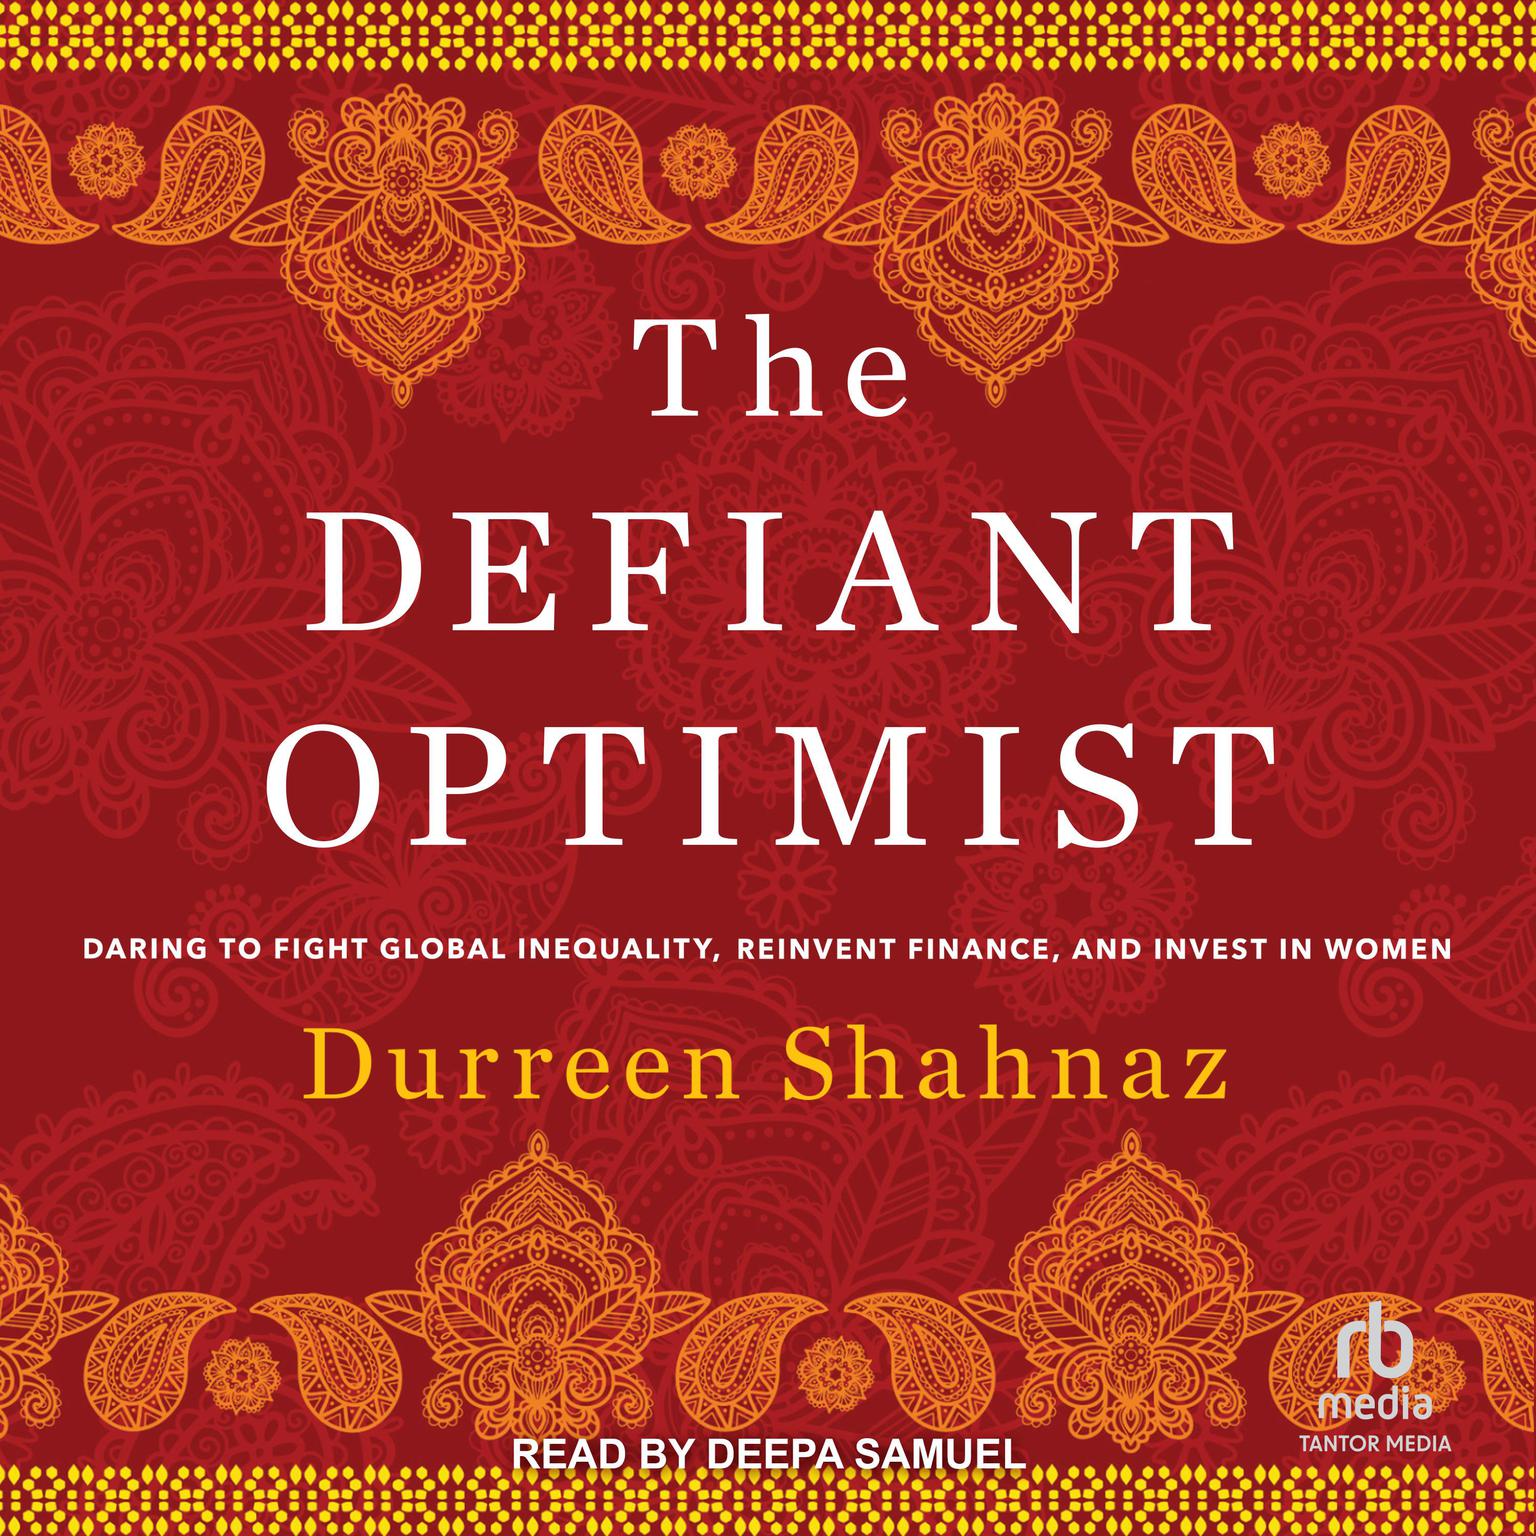 The Defiant Optimist: Daring to Fight Global Inequality, Reinvent Finance, and Invest in Women Audiobook, by Durreen Shahnaz